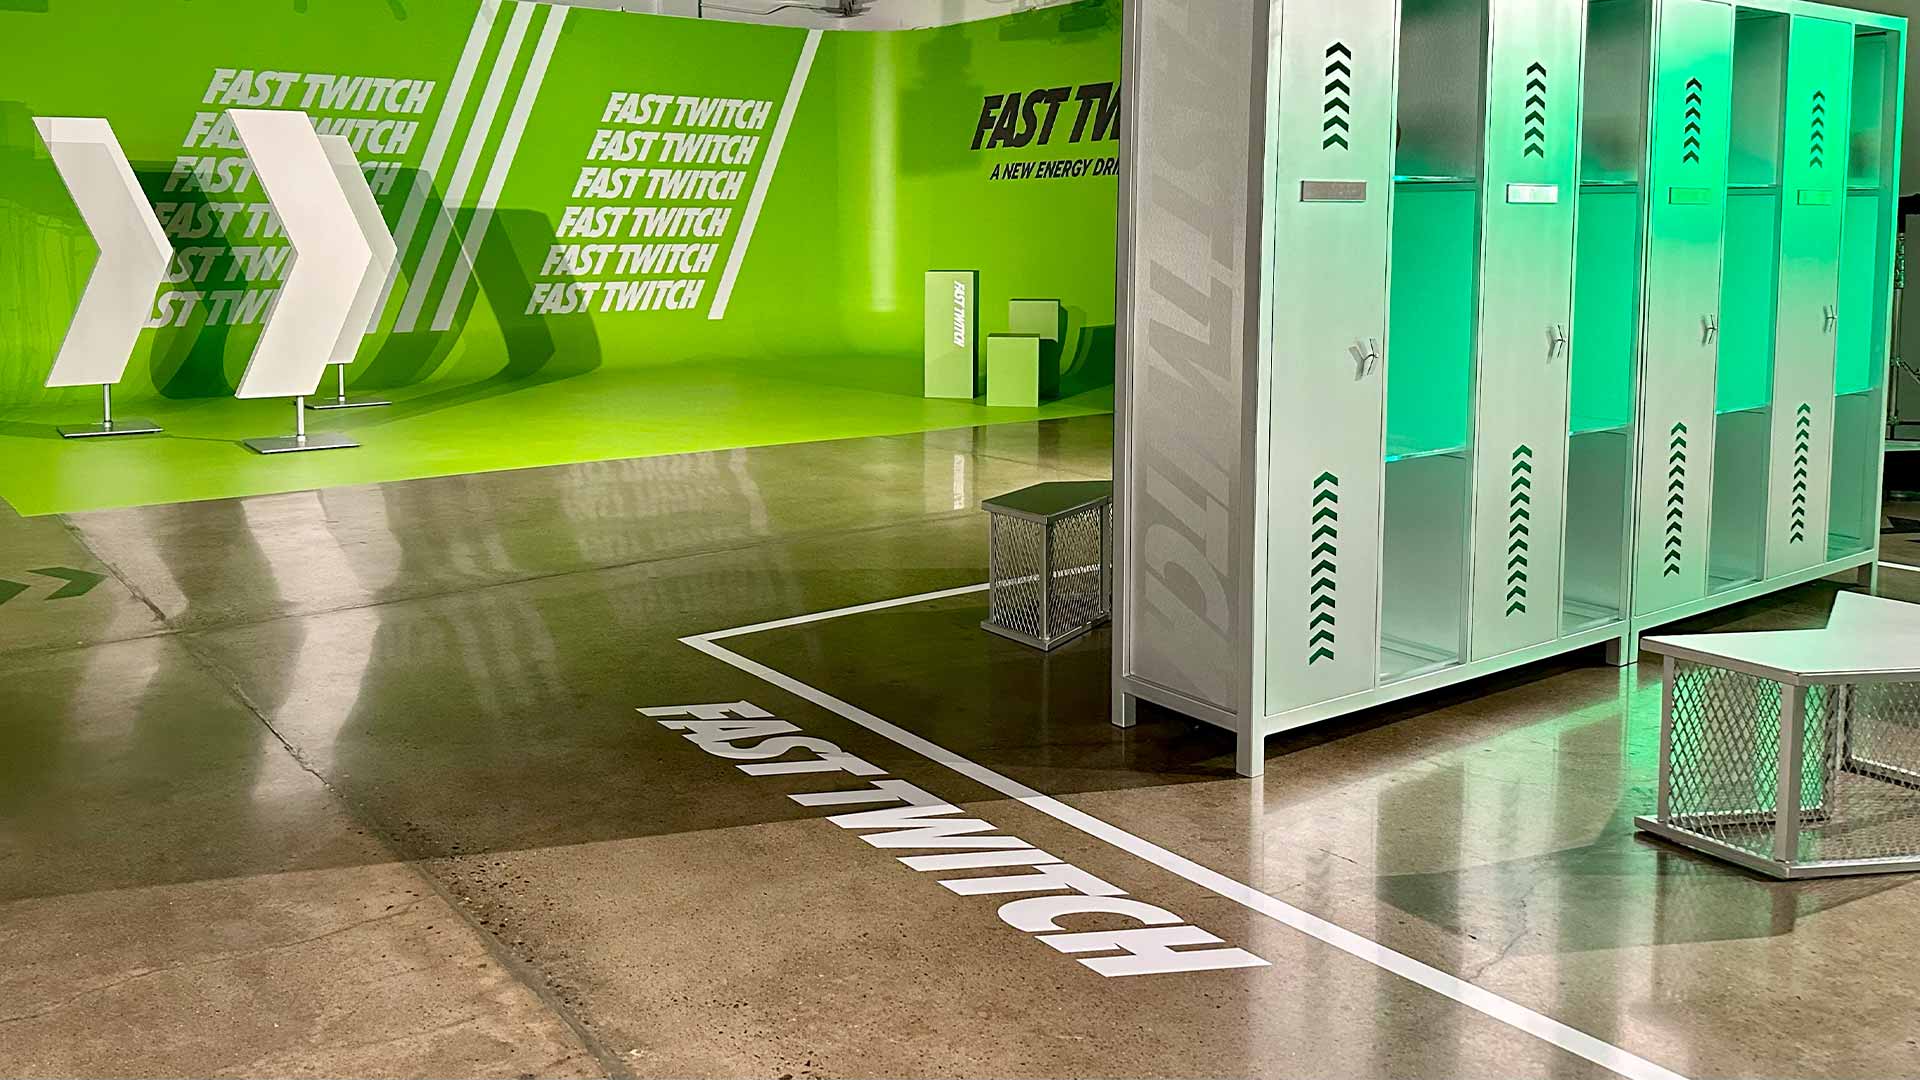 Fast Twitch locker room with custom graphics and green lighting.